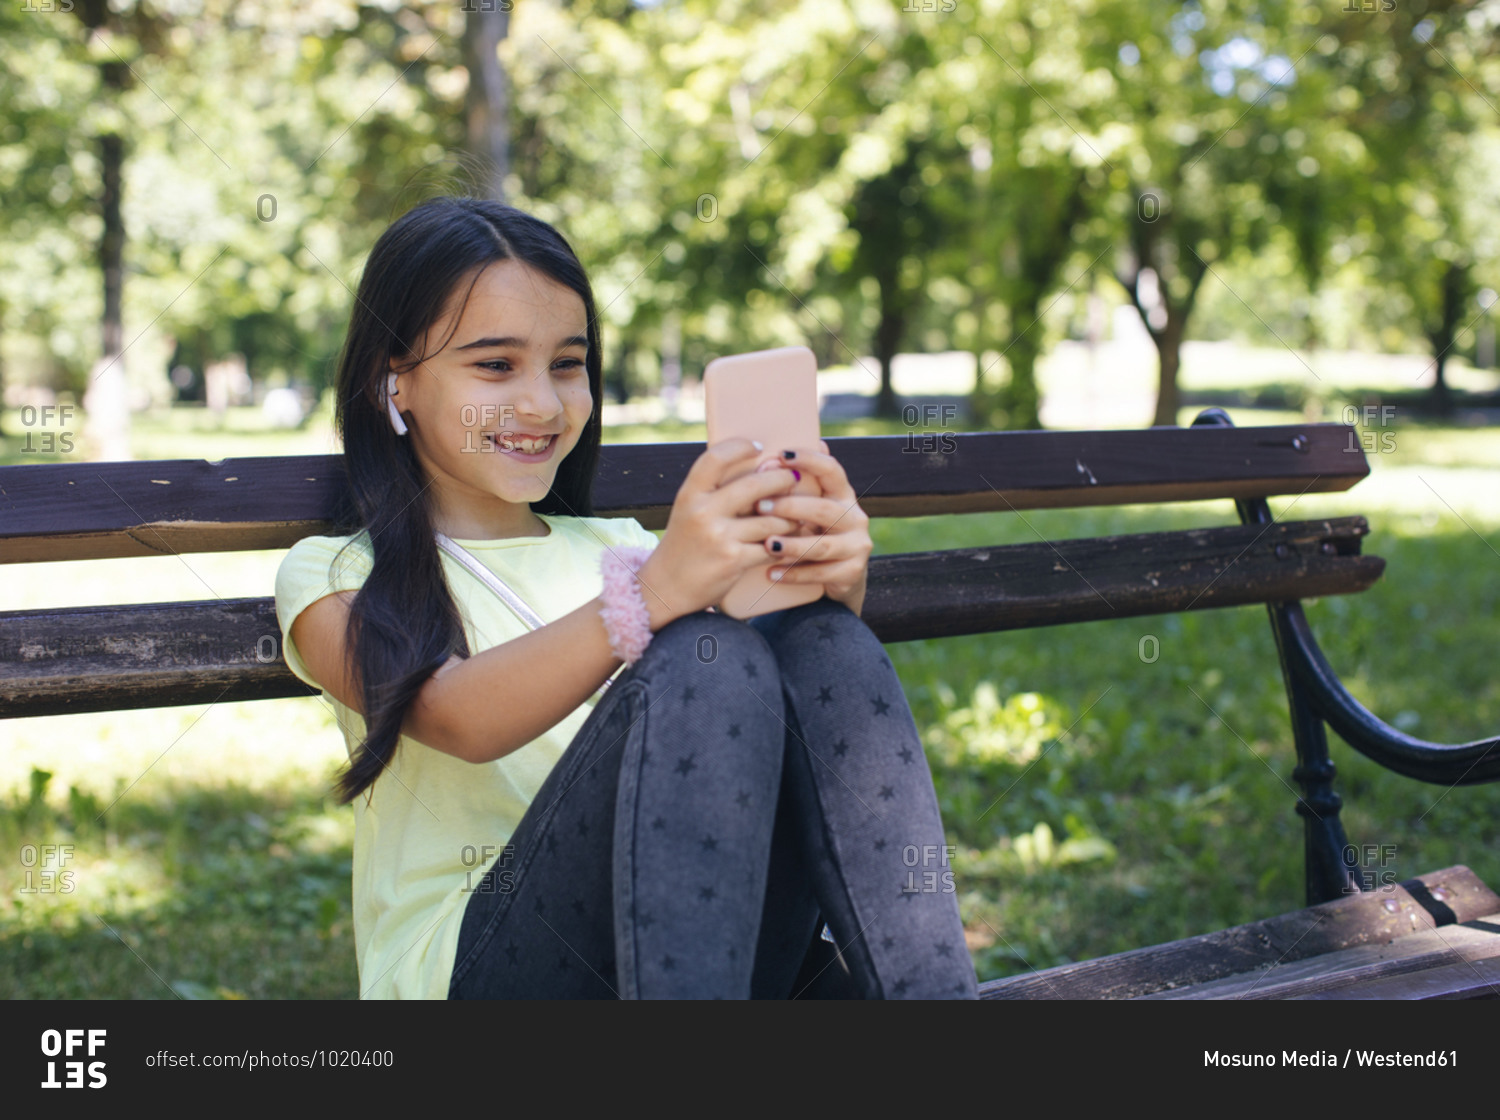 Smiling girl using phone while sitting on bench in park